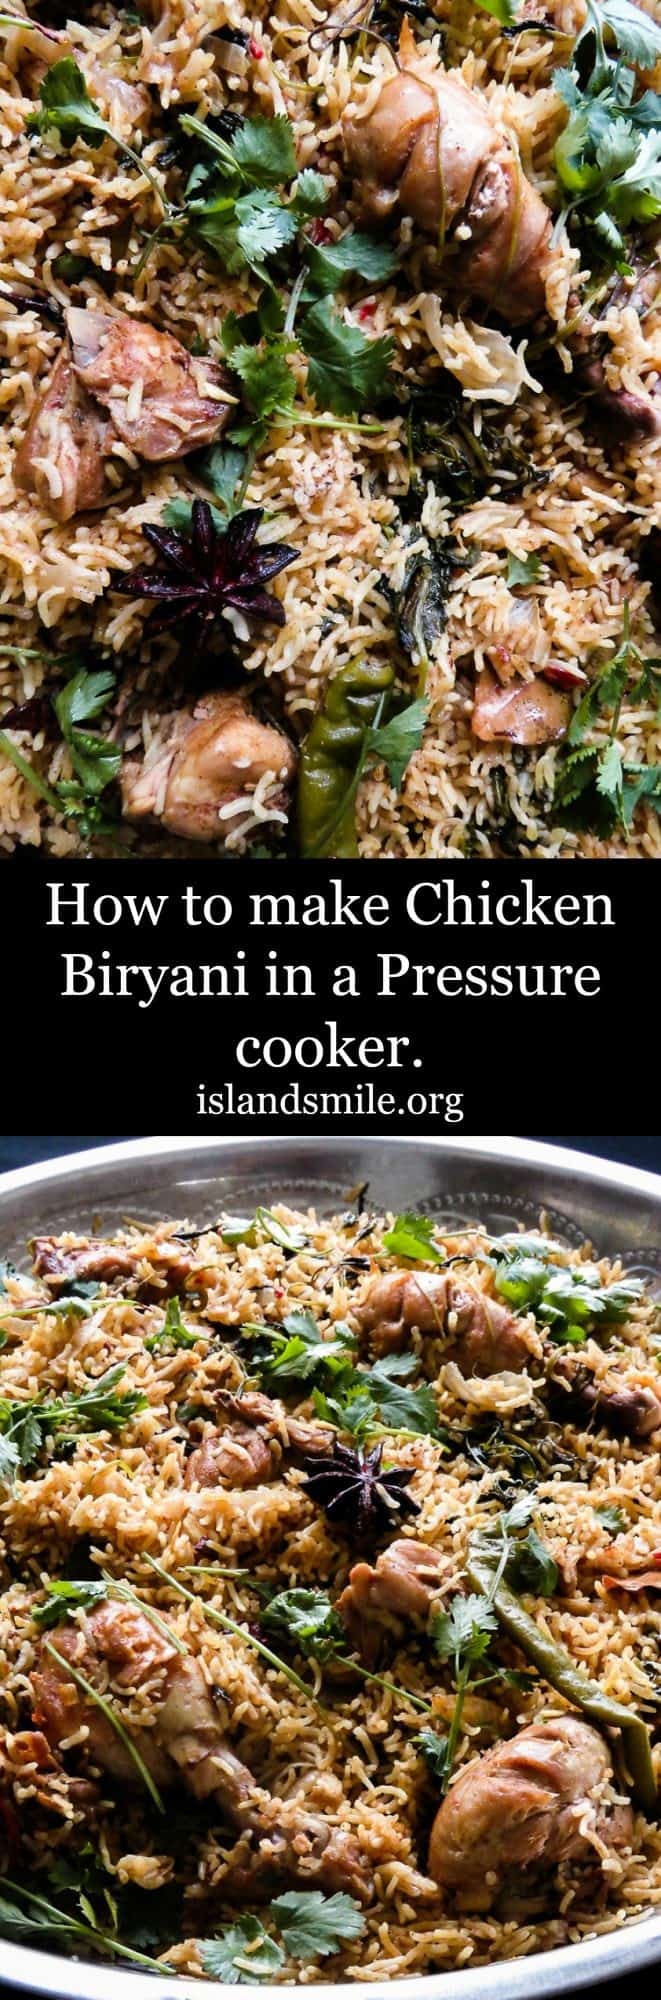 How to make Chicken Biryani in a Pressure cooker. | ISLAND SMILE